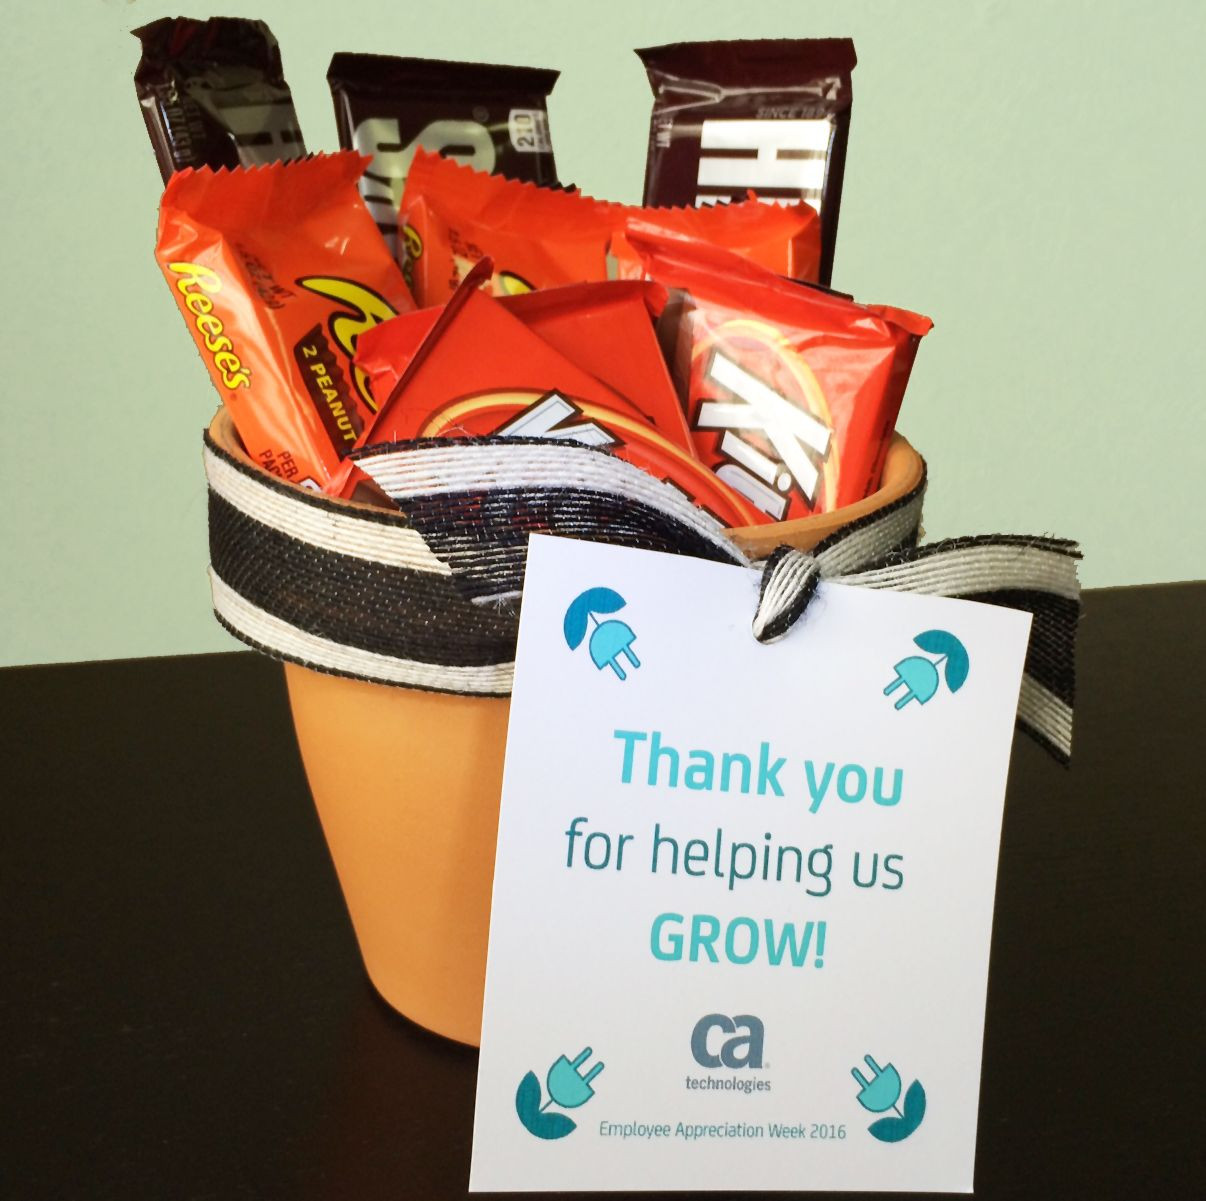 Employee Anniversary Gift Ideas
 "Thank you for helping us grow " planter with candy